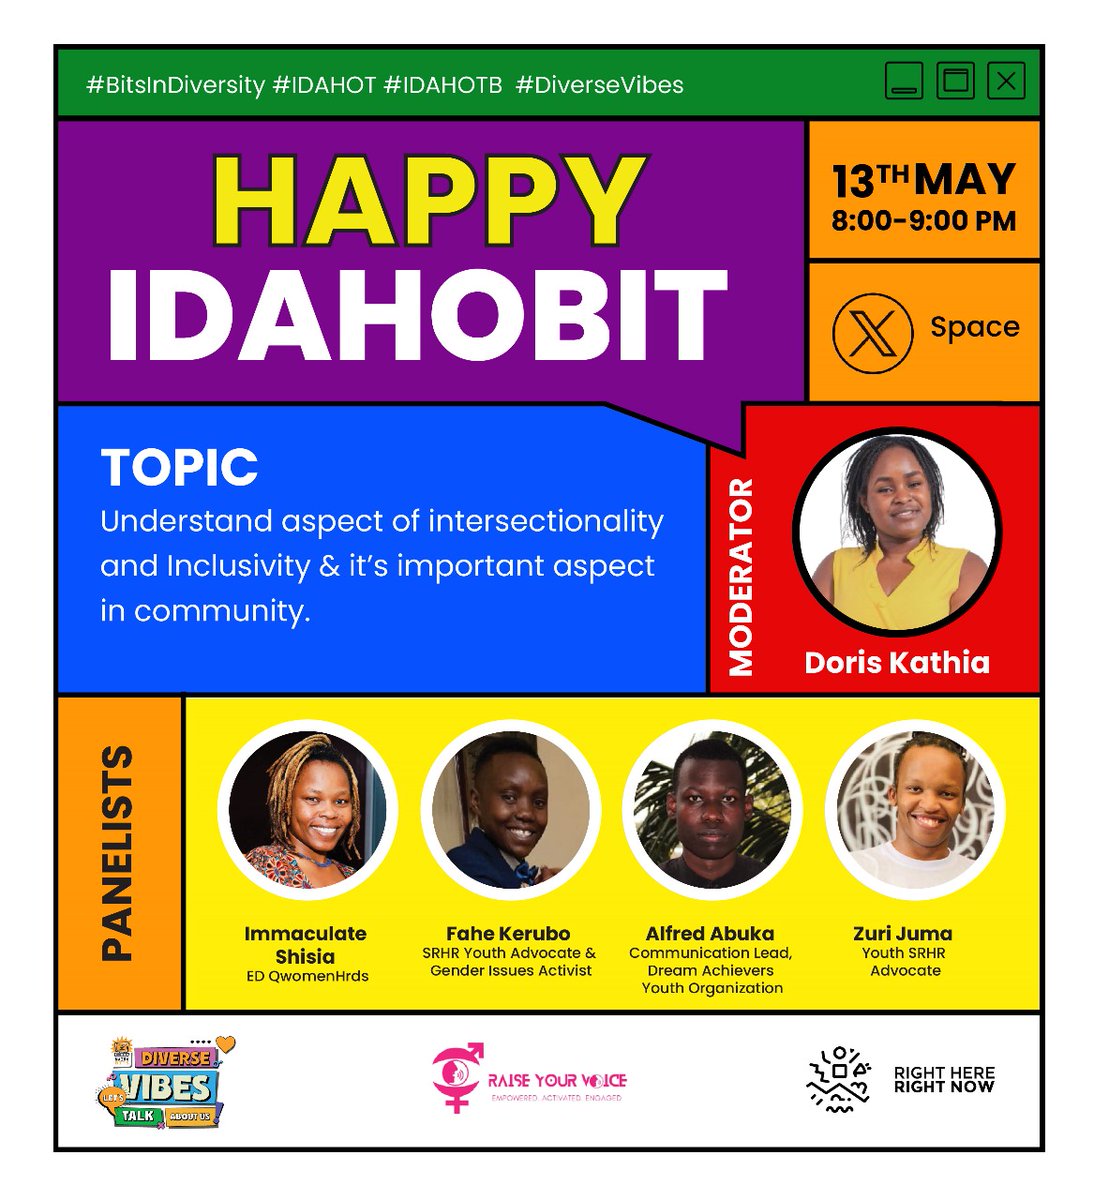 Tune in within the next hour to gain valuable insights from our panel of experts as we explore the significance of intersectionality and inclusivity in fostering vibrant, diverse communities. #BitsInDiversity #IDAHOT #IDAHOTB #DiverseVibes @raiseyourv_oice @QwomenHRDs